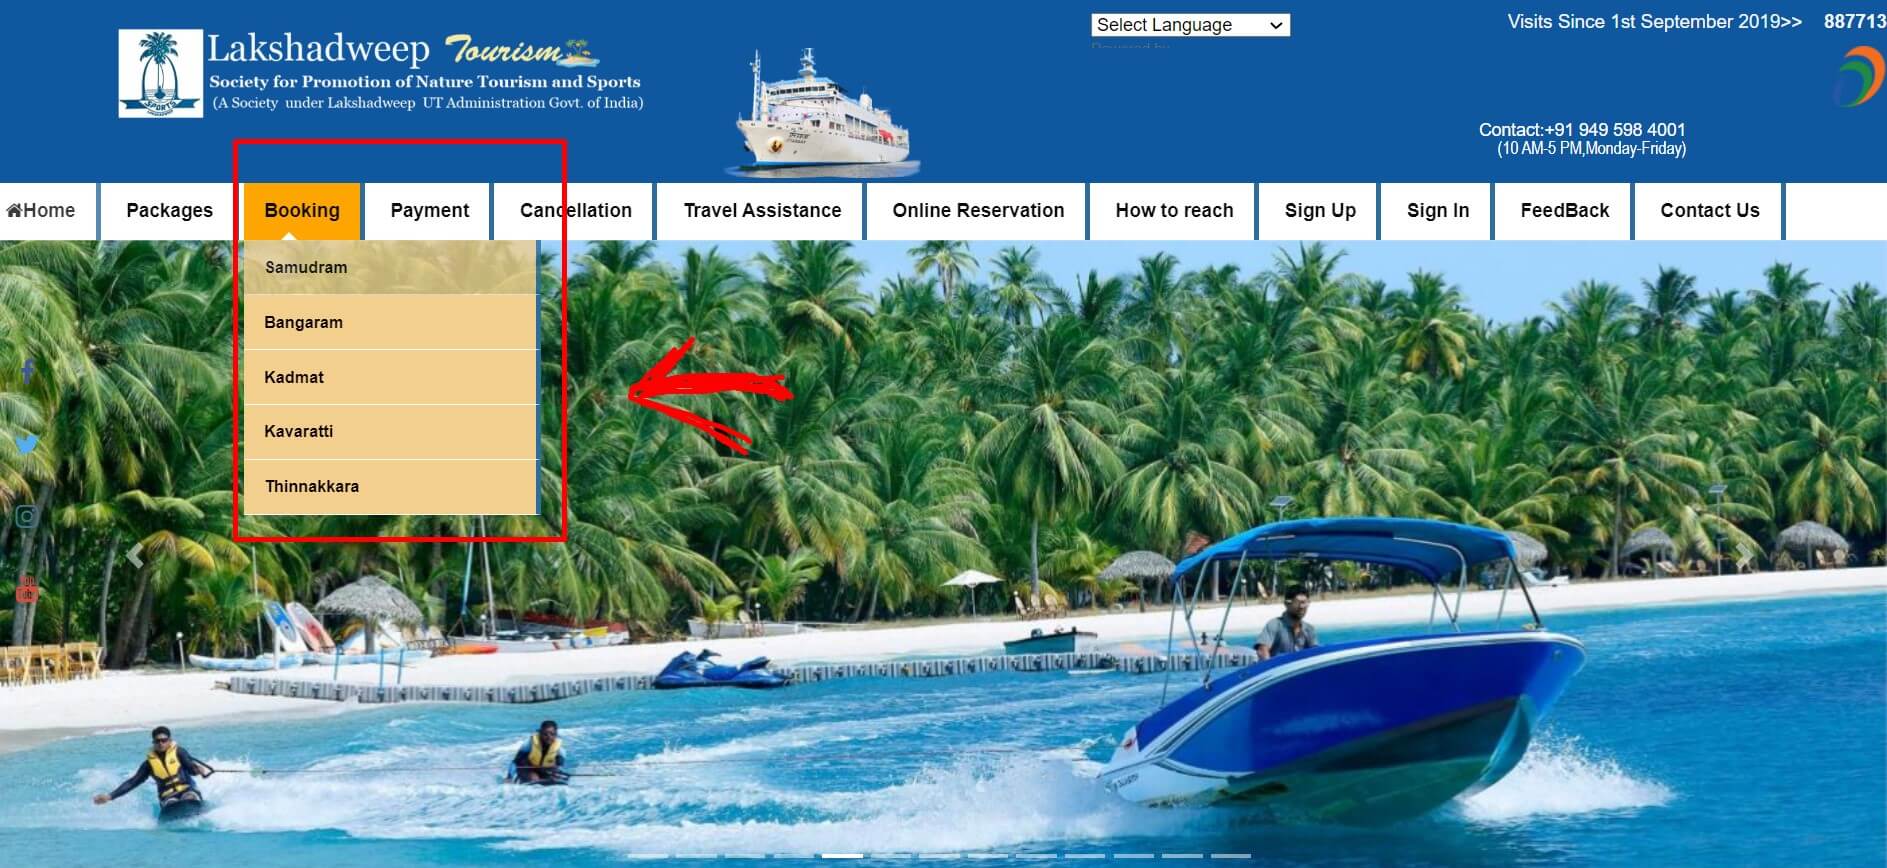 Planning a trip to Lakshadweep may seem a bit difficult if you don't have all the right information. This is your guide to do the Bookings for Lakshadweep!